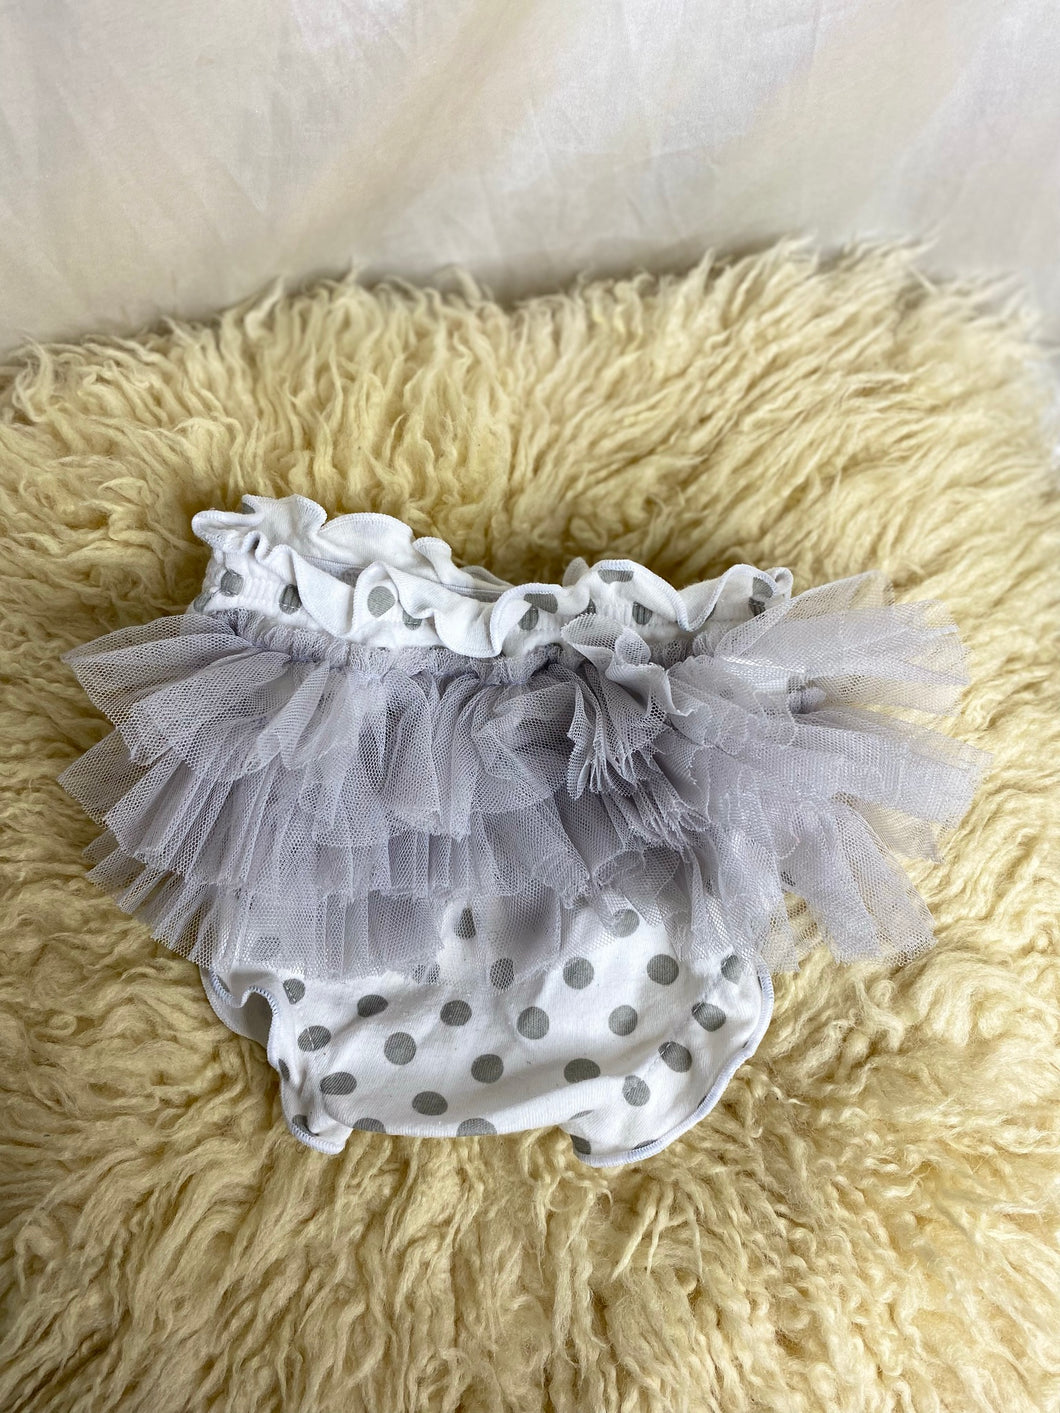 Pom-poms White and Grey Ruffle Polka Dot baby girls pant size 6-24 months